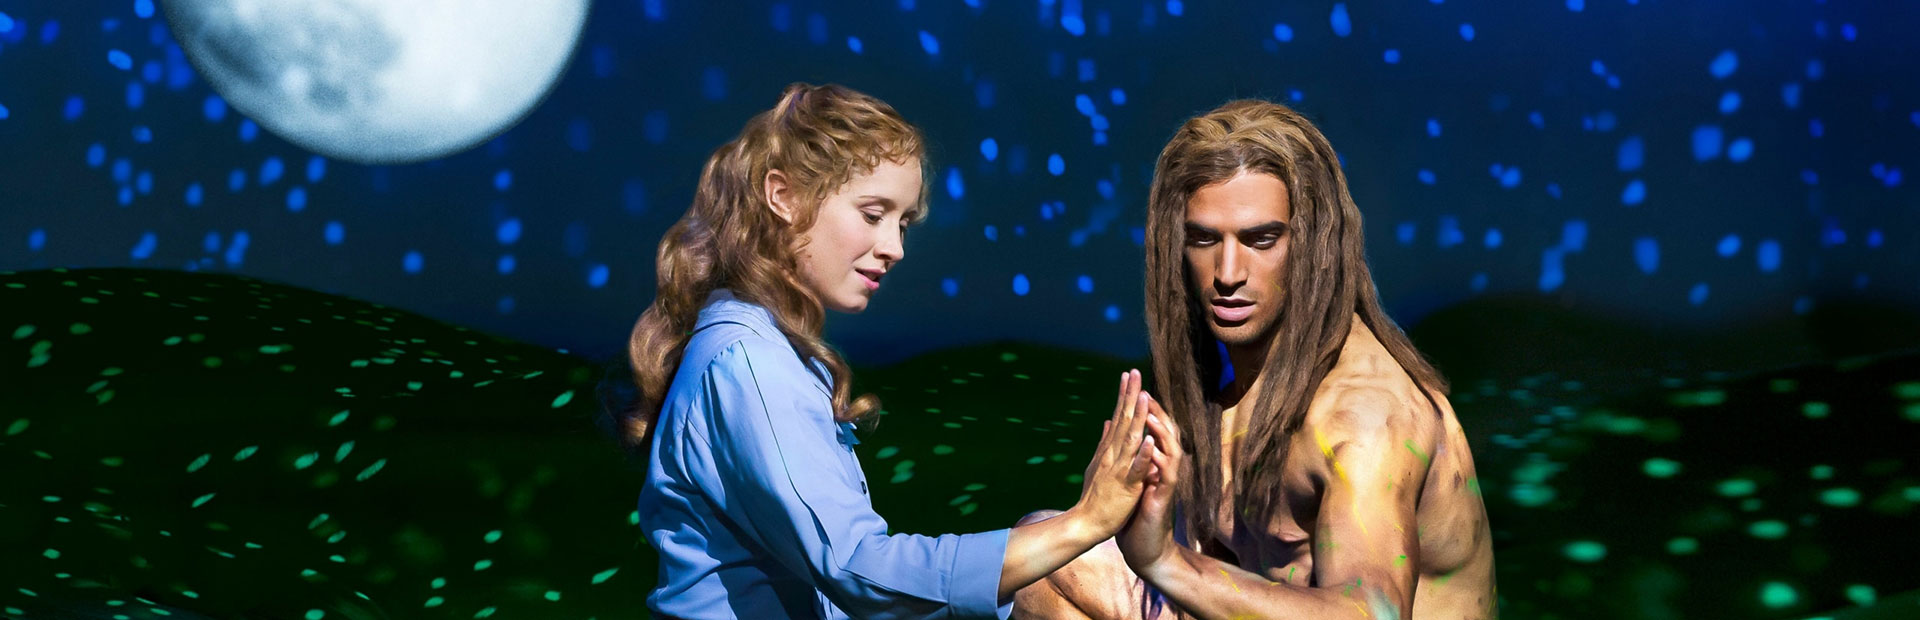 Tarzan and Jane in a touching moment on stage